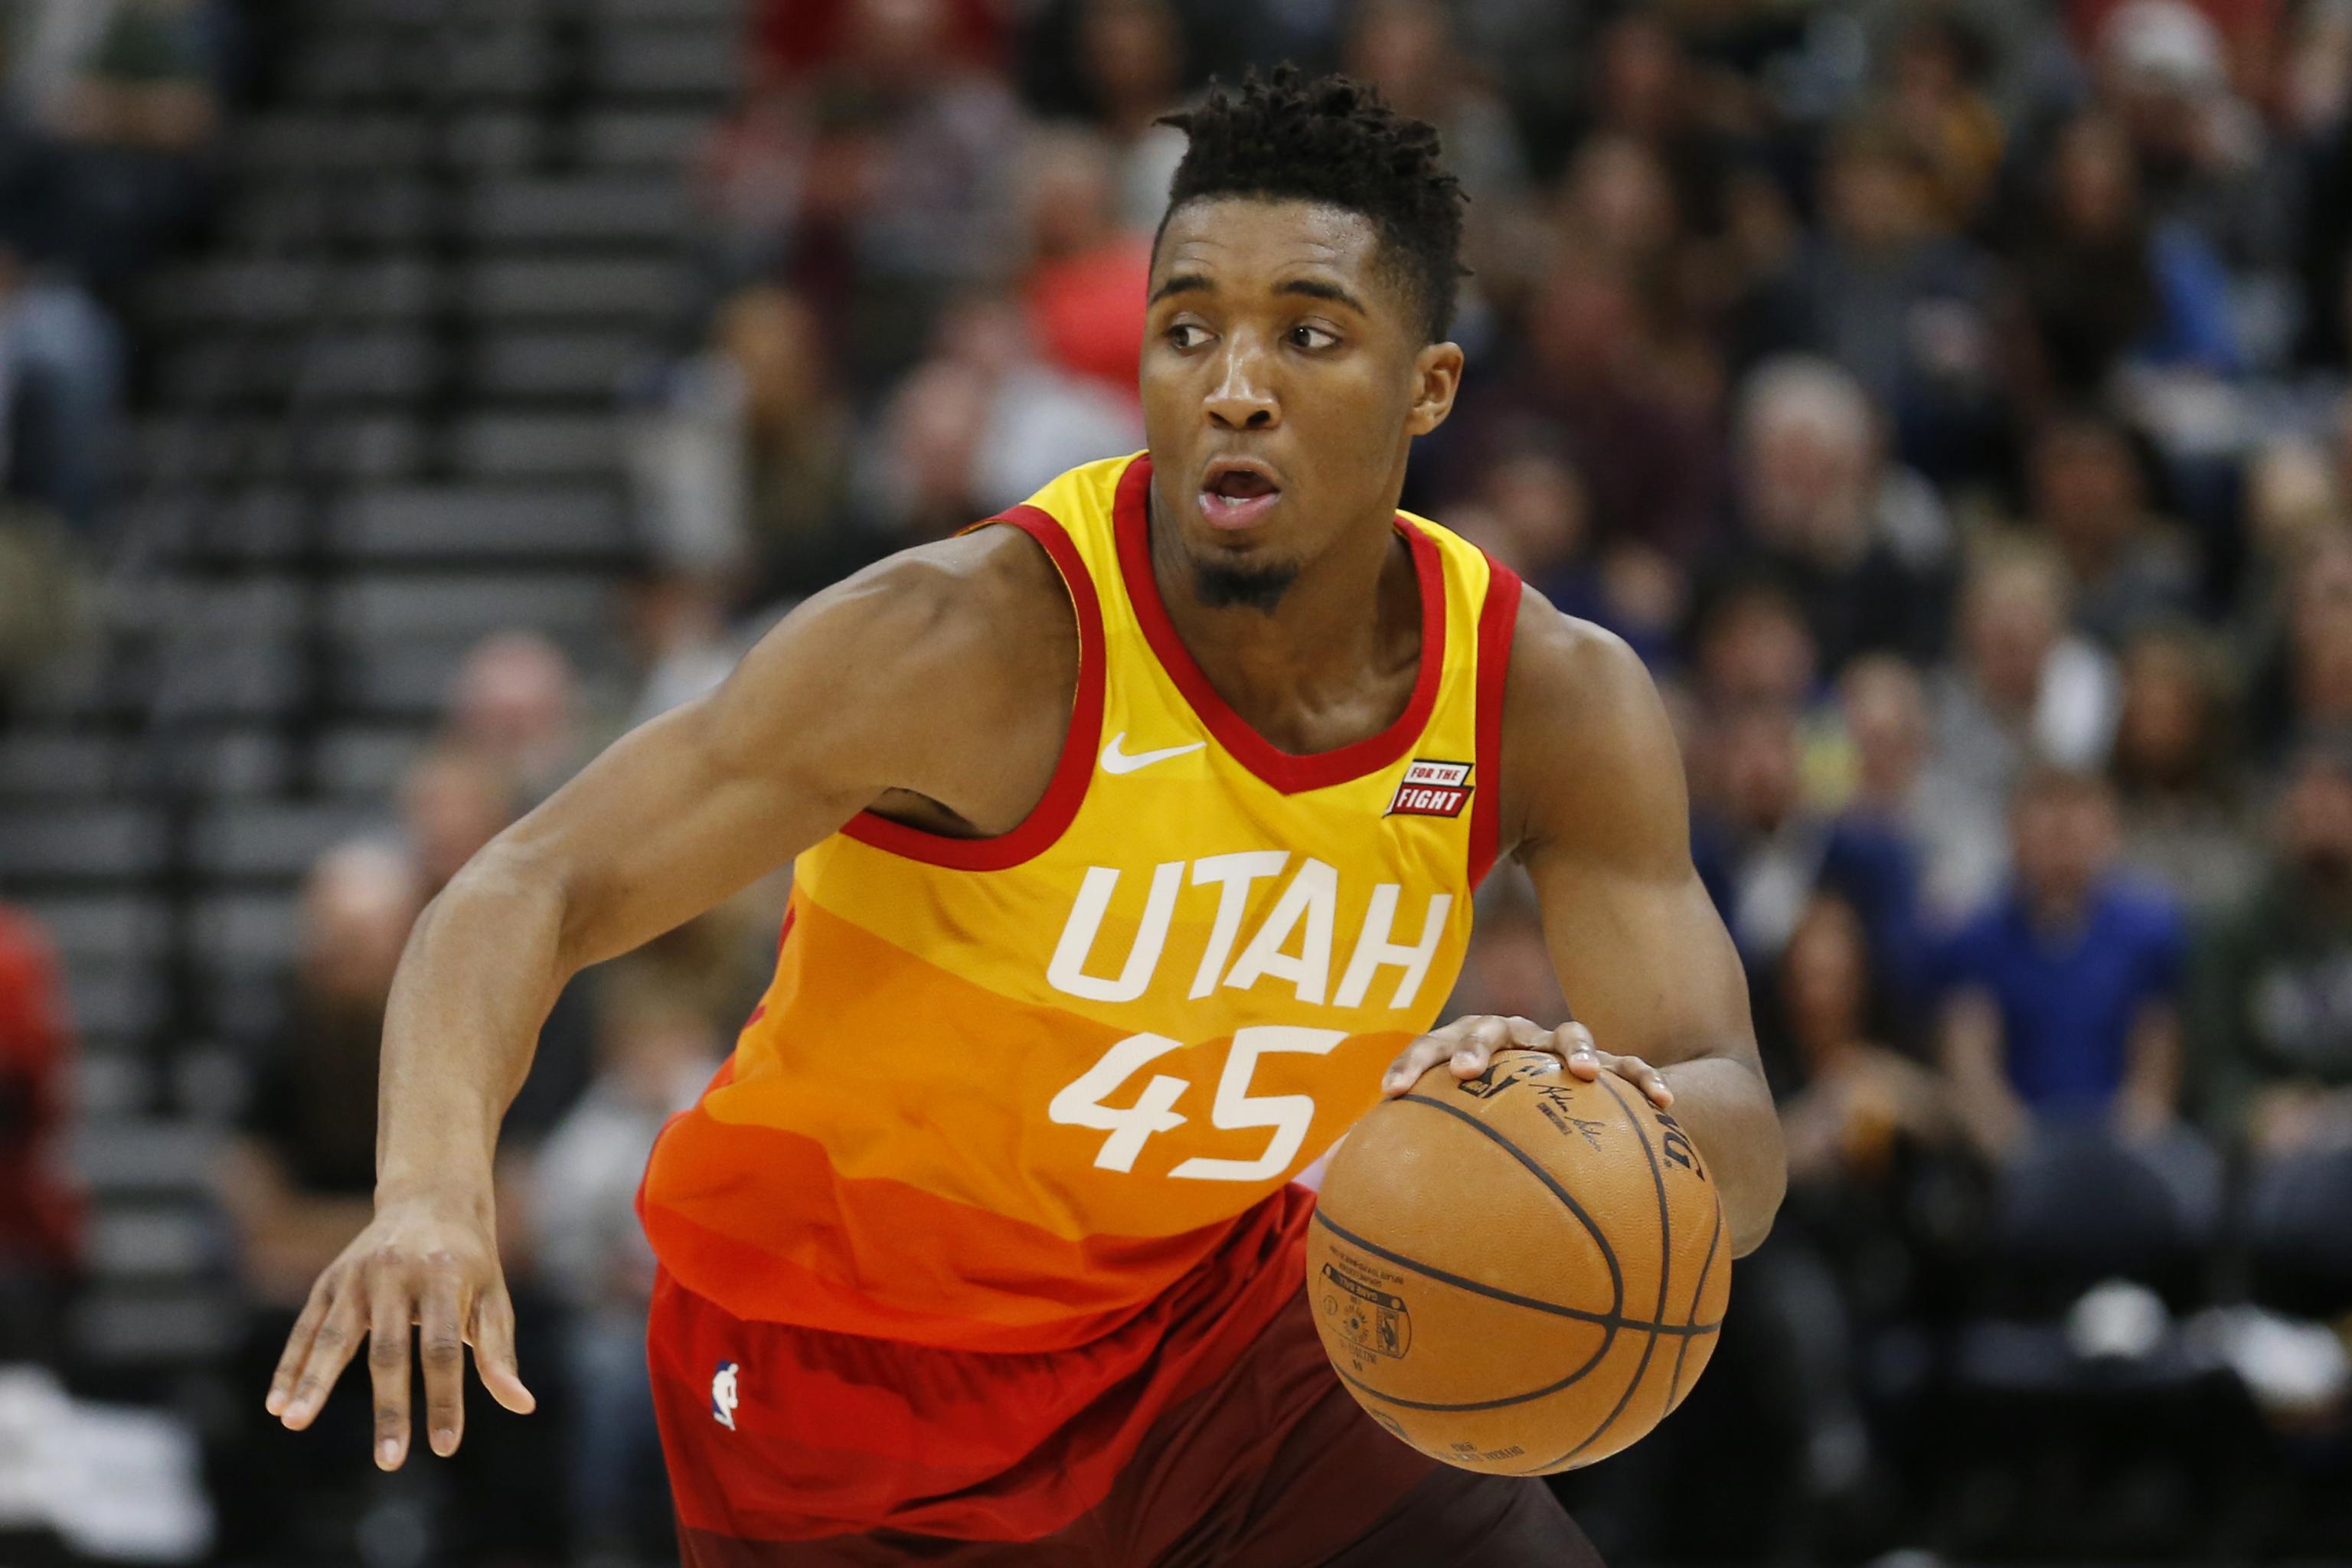 Ben Simmons vs Donovan Mitchell – The Unlikely Rivalry - The Runner Sports